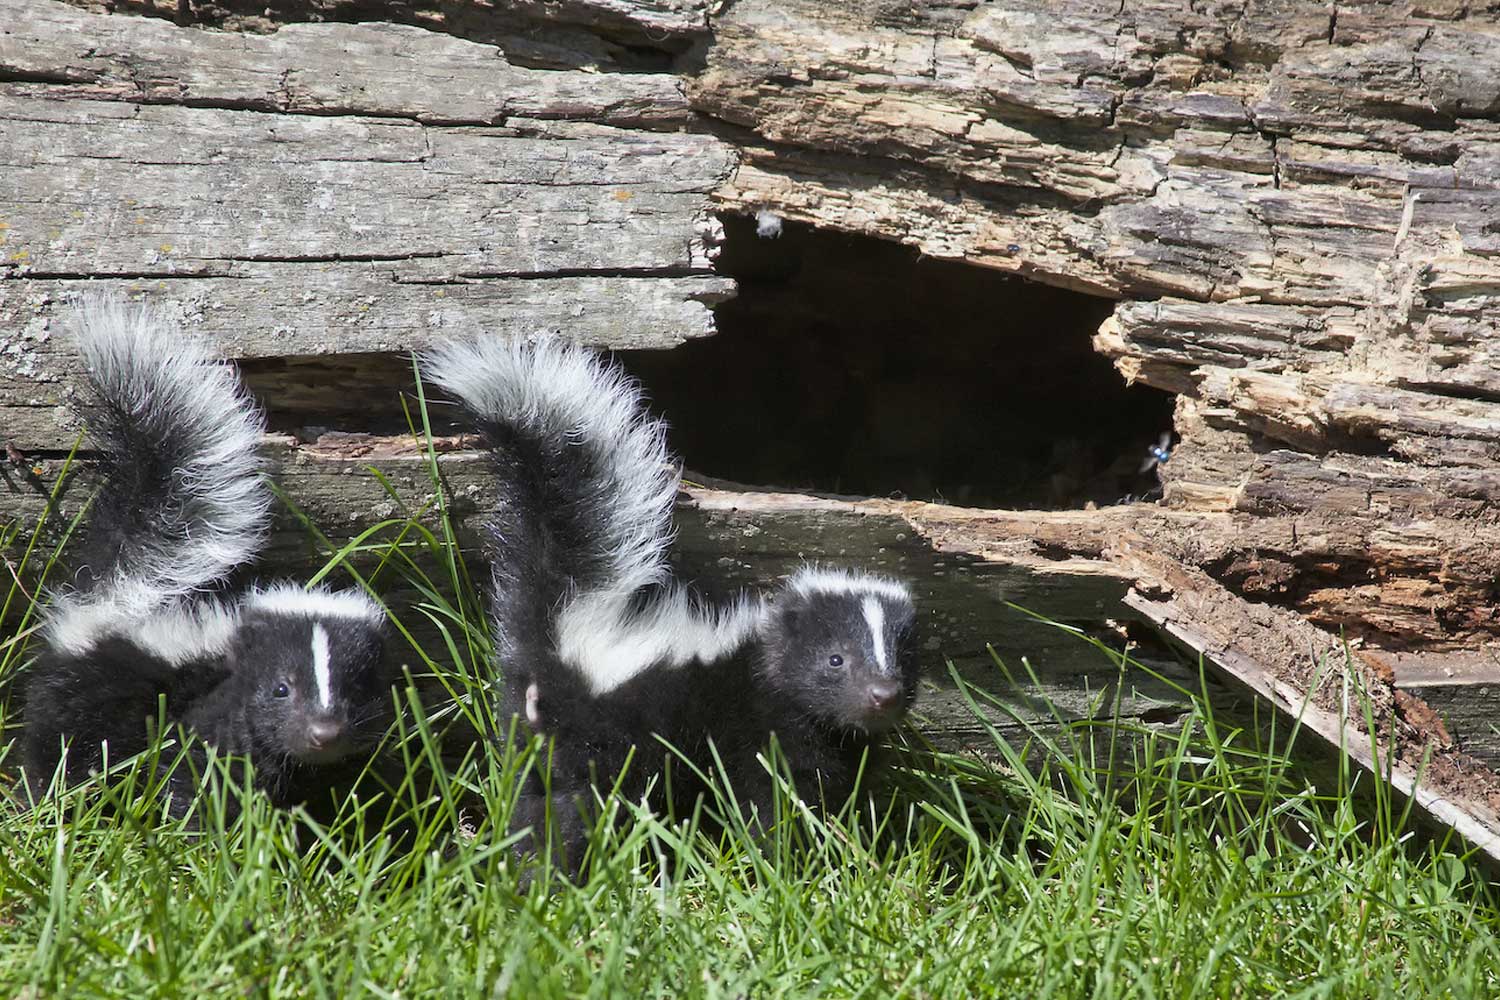 Two young skunks standing in the grass next to a fallen log.